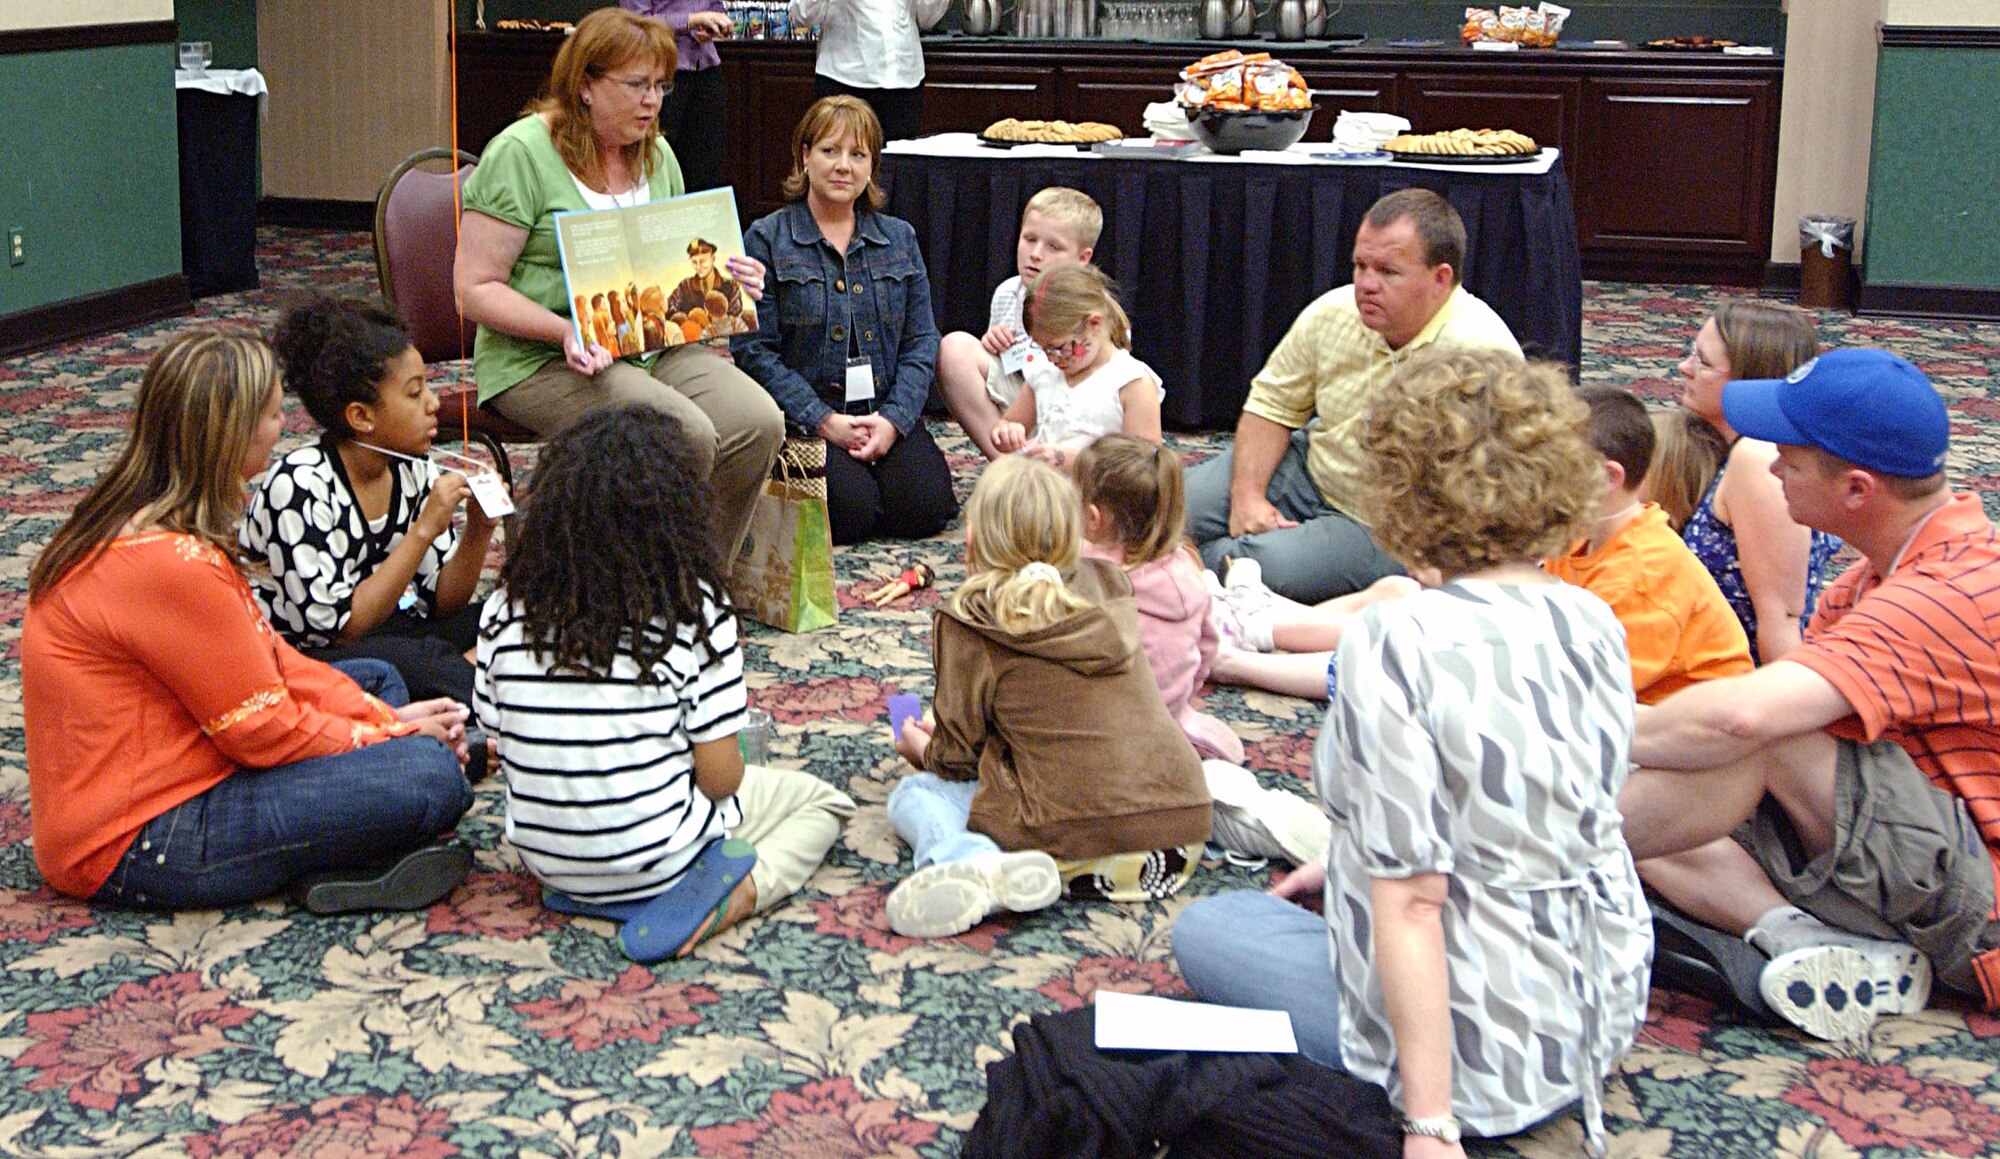 Children – and a few parents -- listen to an adult volunteer read “Mercedes and the Chocolate Pilot” during the Tell Me a Story™ event sponsored by the Texas Military Forces State Family Program in Austin March 29. (Texas Military Forces photo by Sgt. Ann Benson)